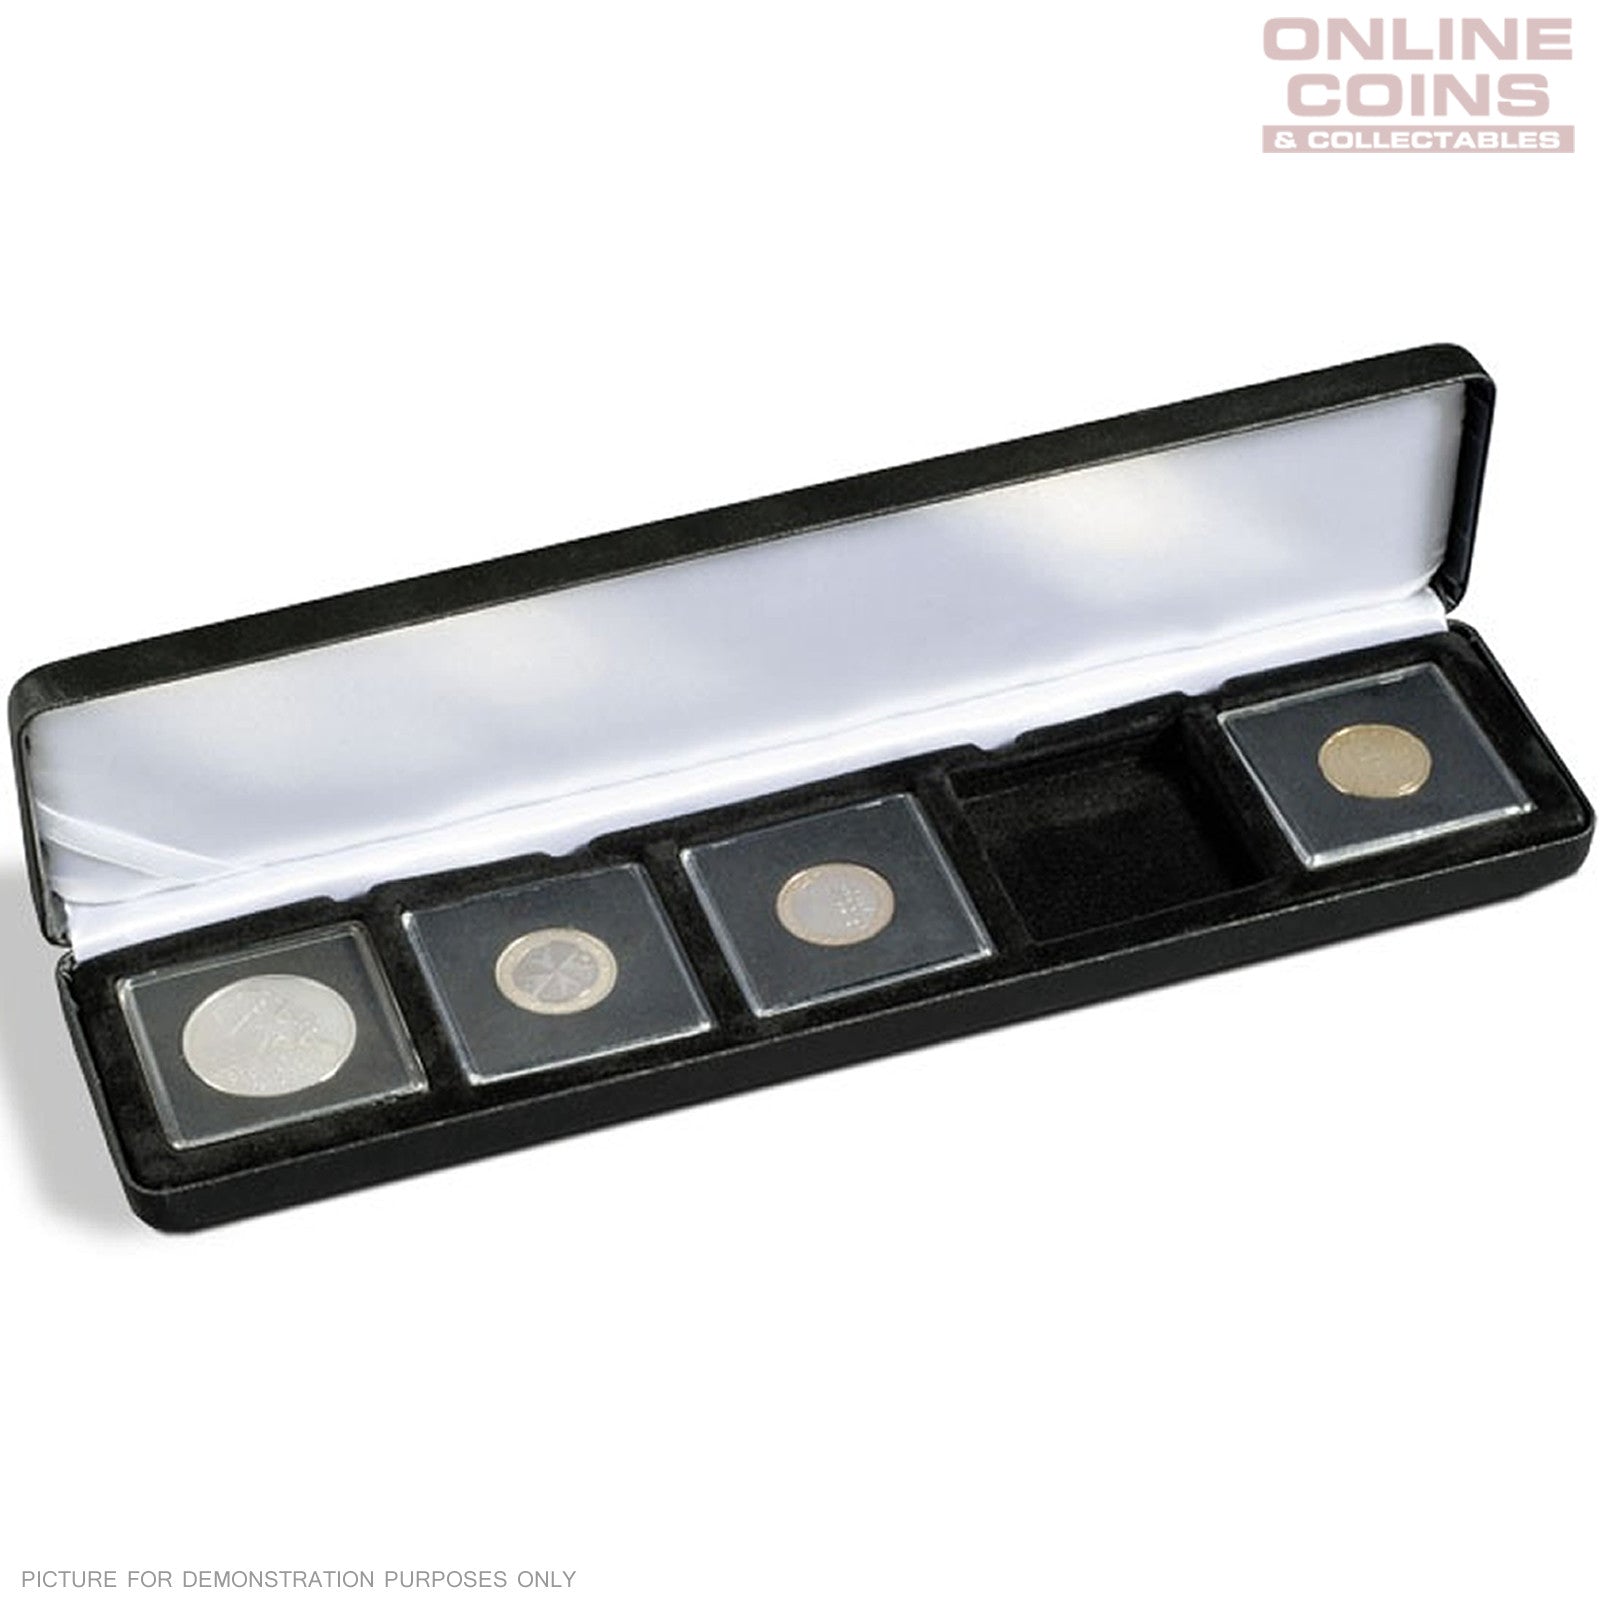 Lighthouse - Nobile Quadrum Satin Lined 5 Coin Display Case - EXCELLENT PRESENTATION